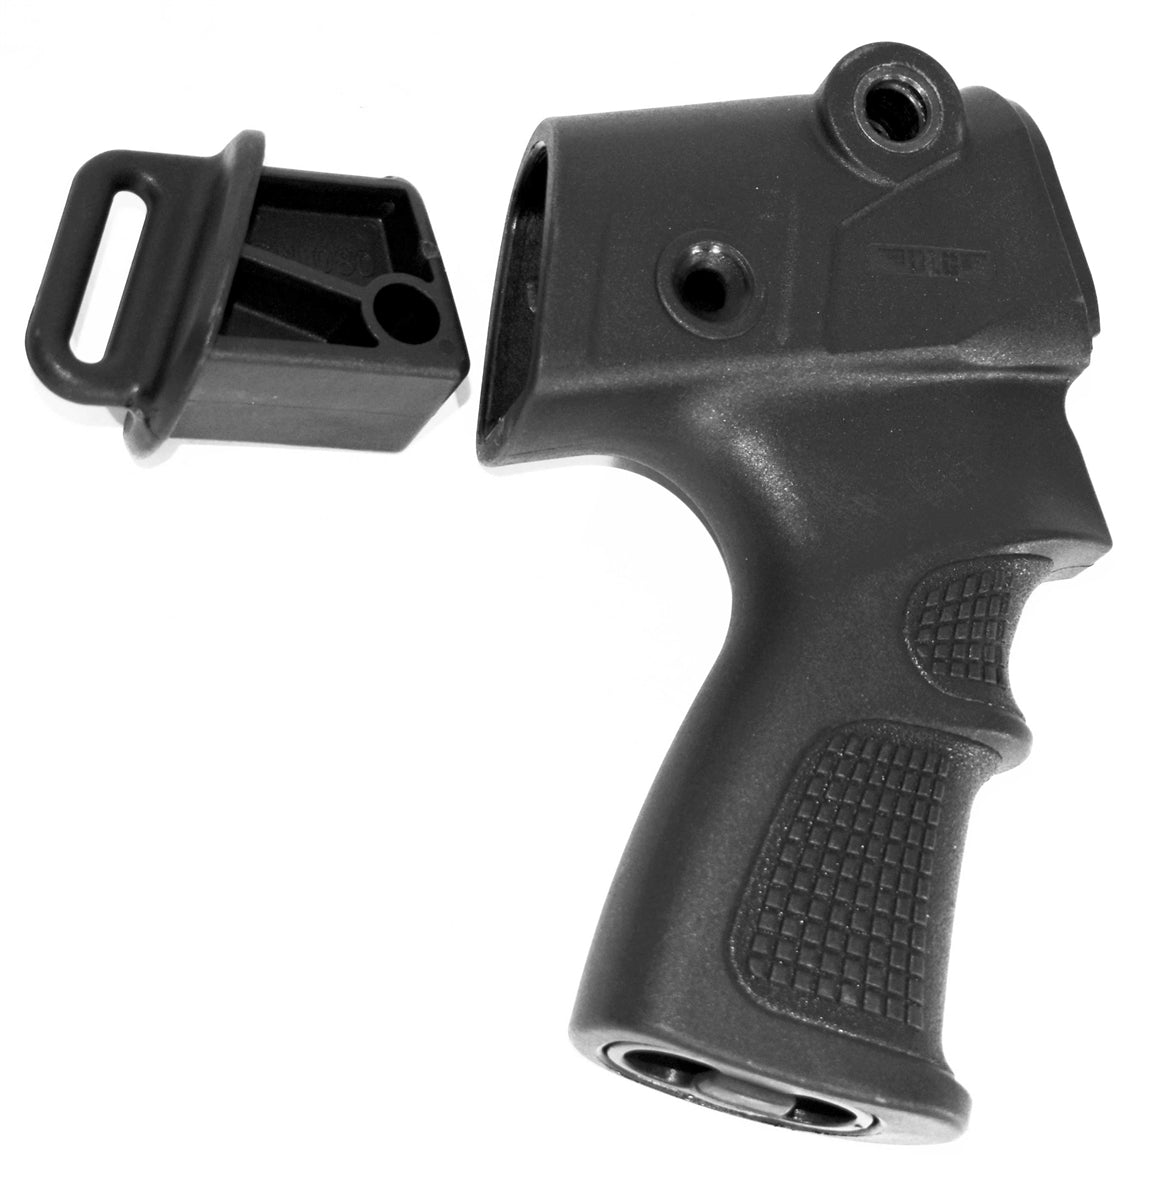 Tactical Rear Grip Compatible With Remington Tac-14 12 Gauge Pumps Home Defense Hunting Accessory.